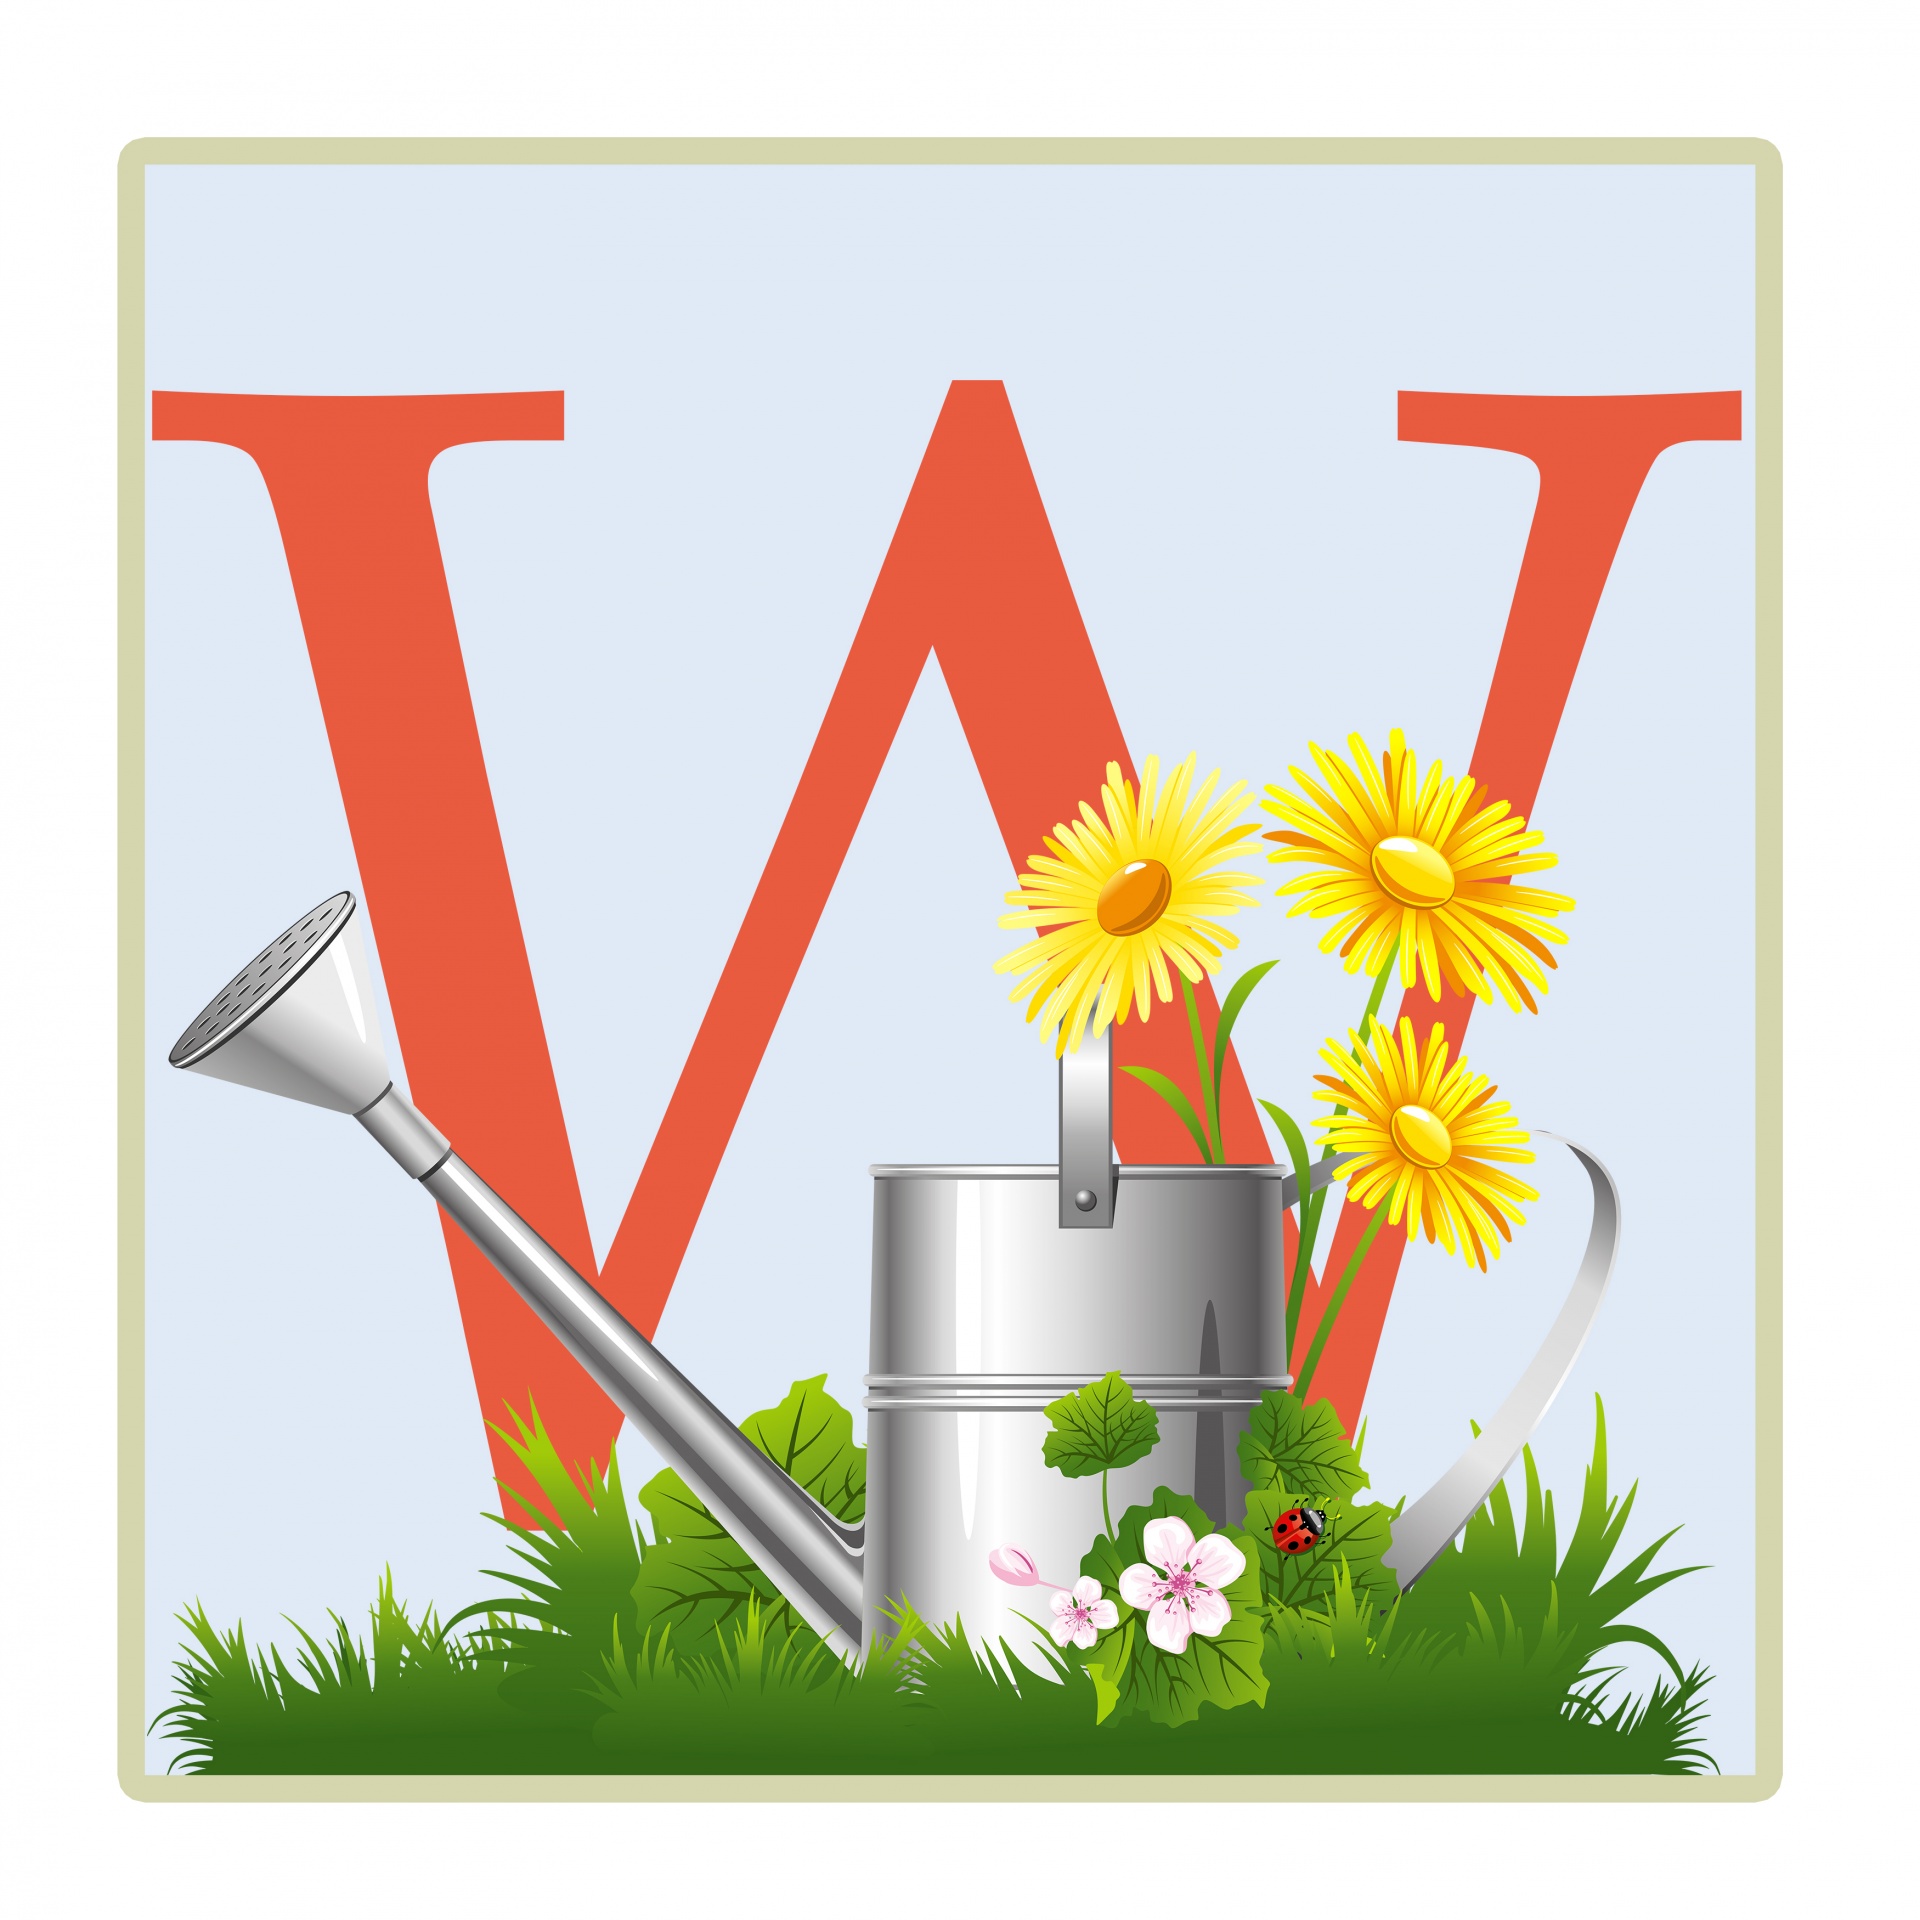 w letter watering can free photo